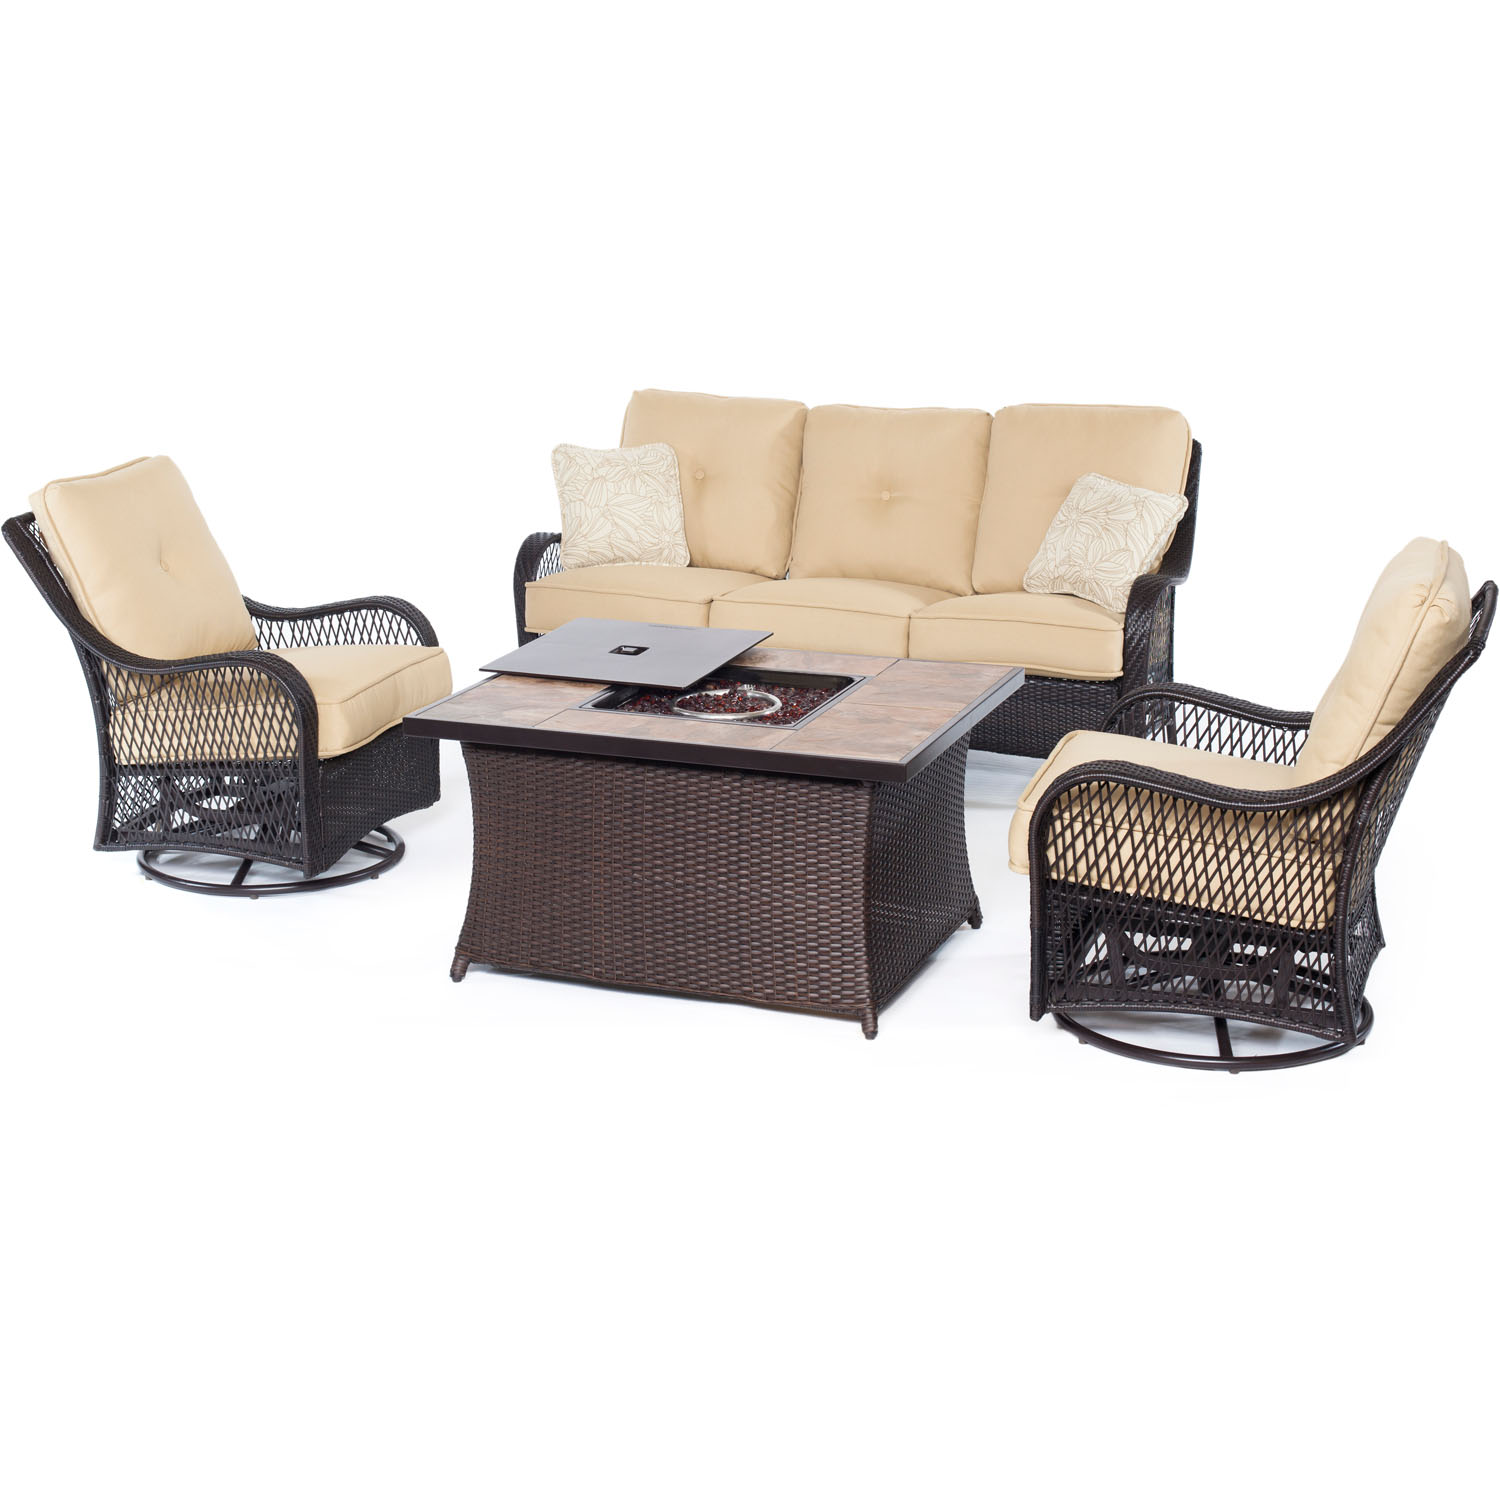 Hanover Orleans 4-Piece Woven Fire Pit Lounge Set with Faux-Stone Tile Top - image 1 of 8